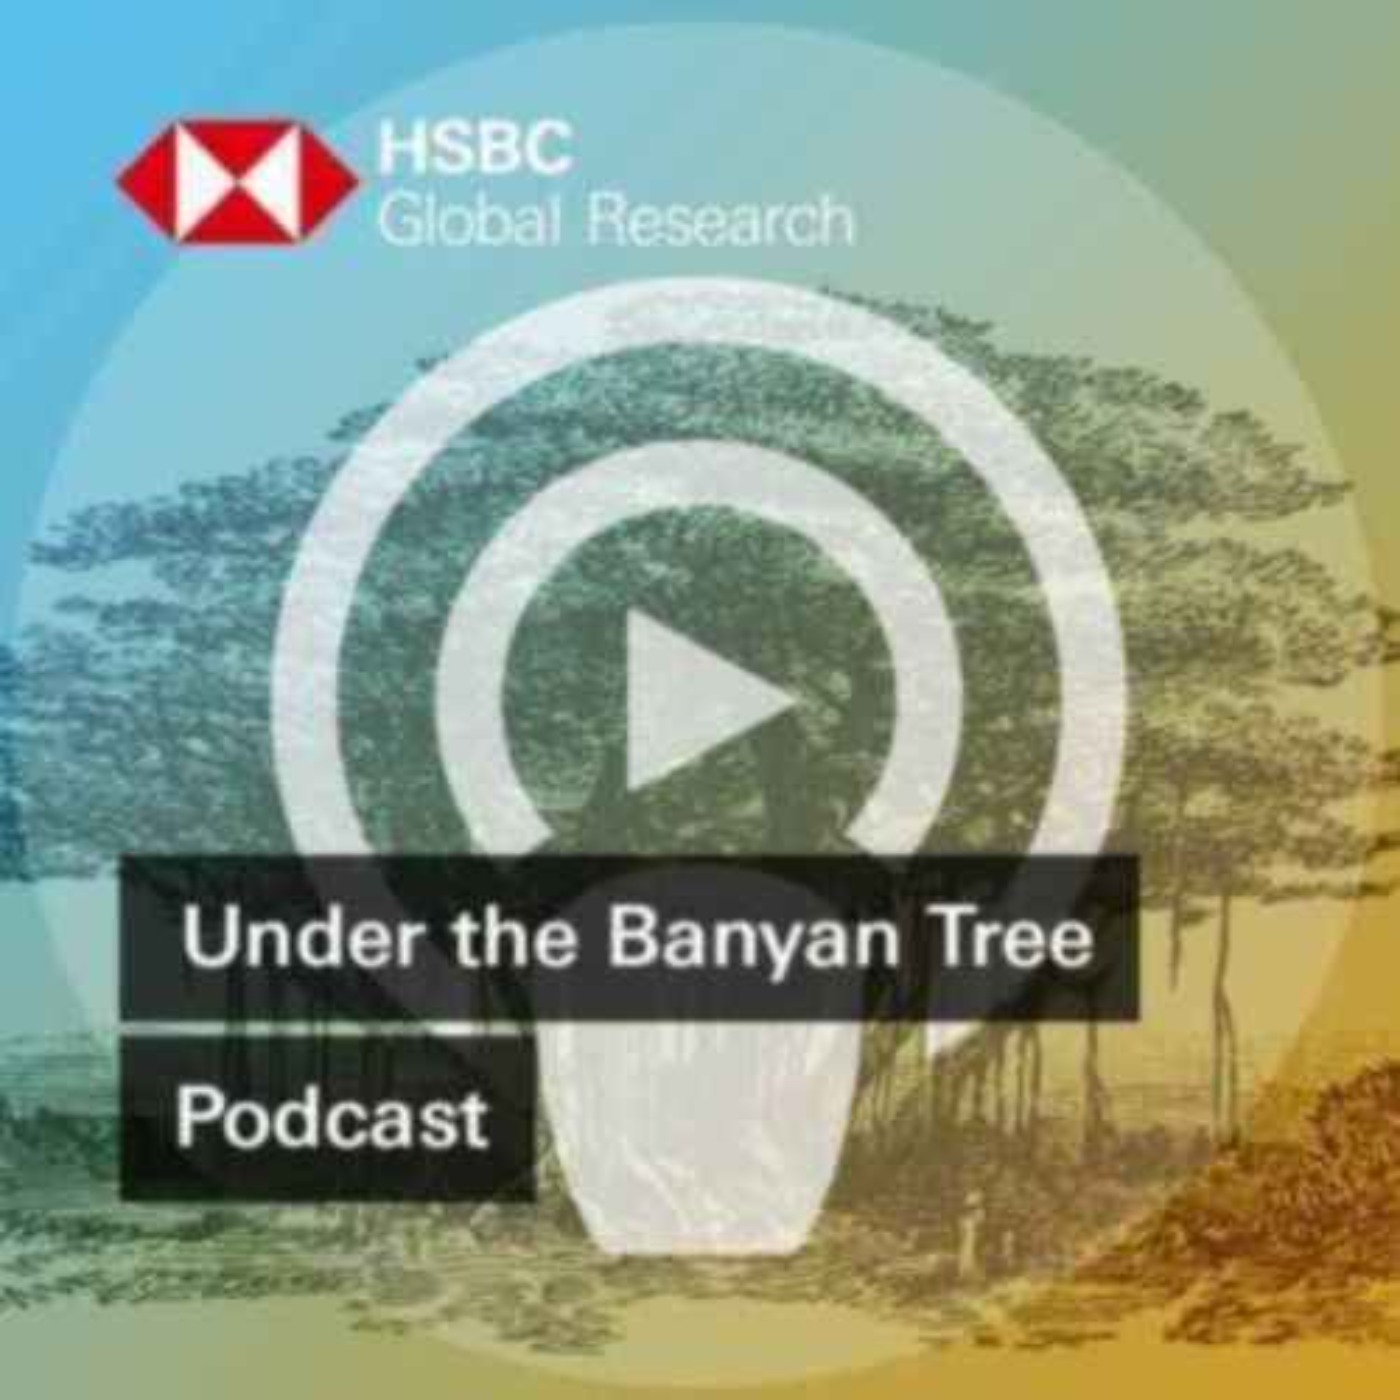 Under the Banyan Tree - China's holiday spending by the numbers